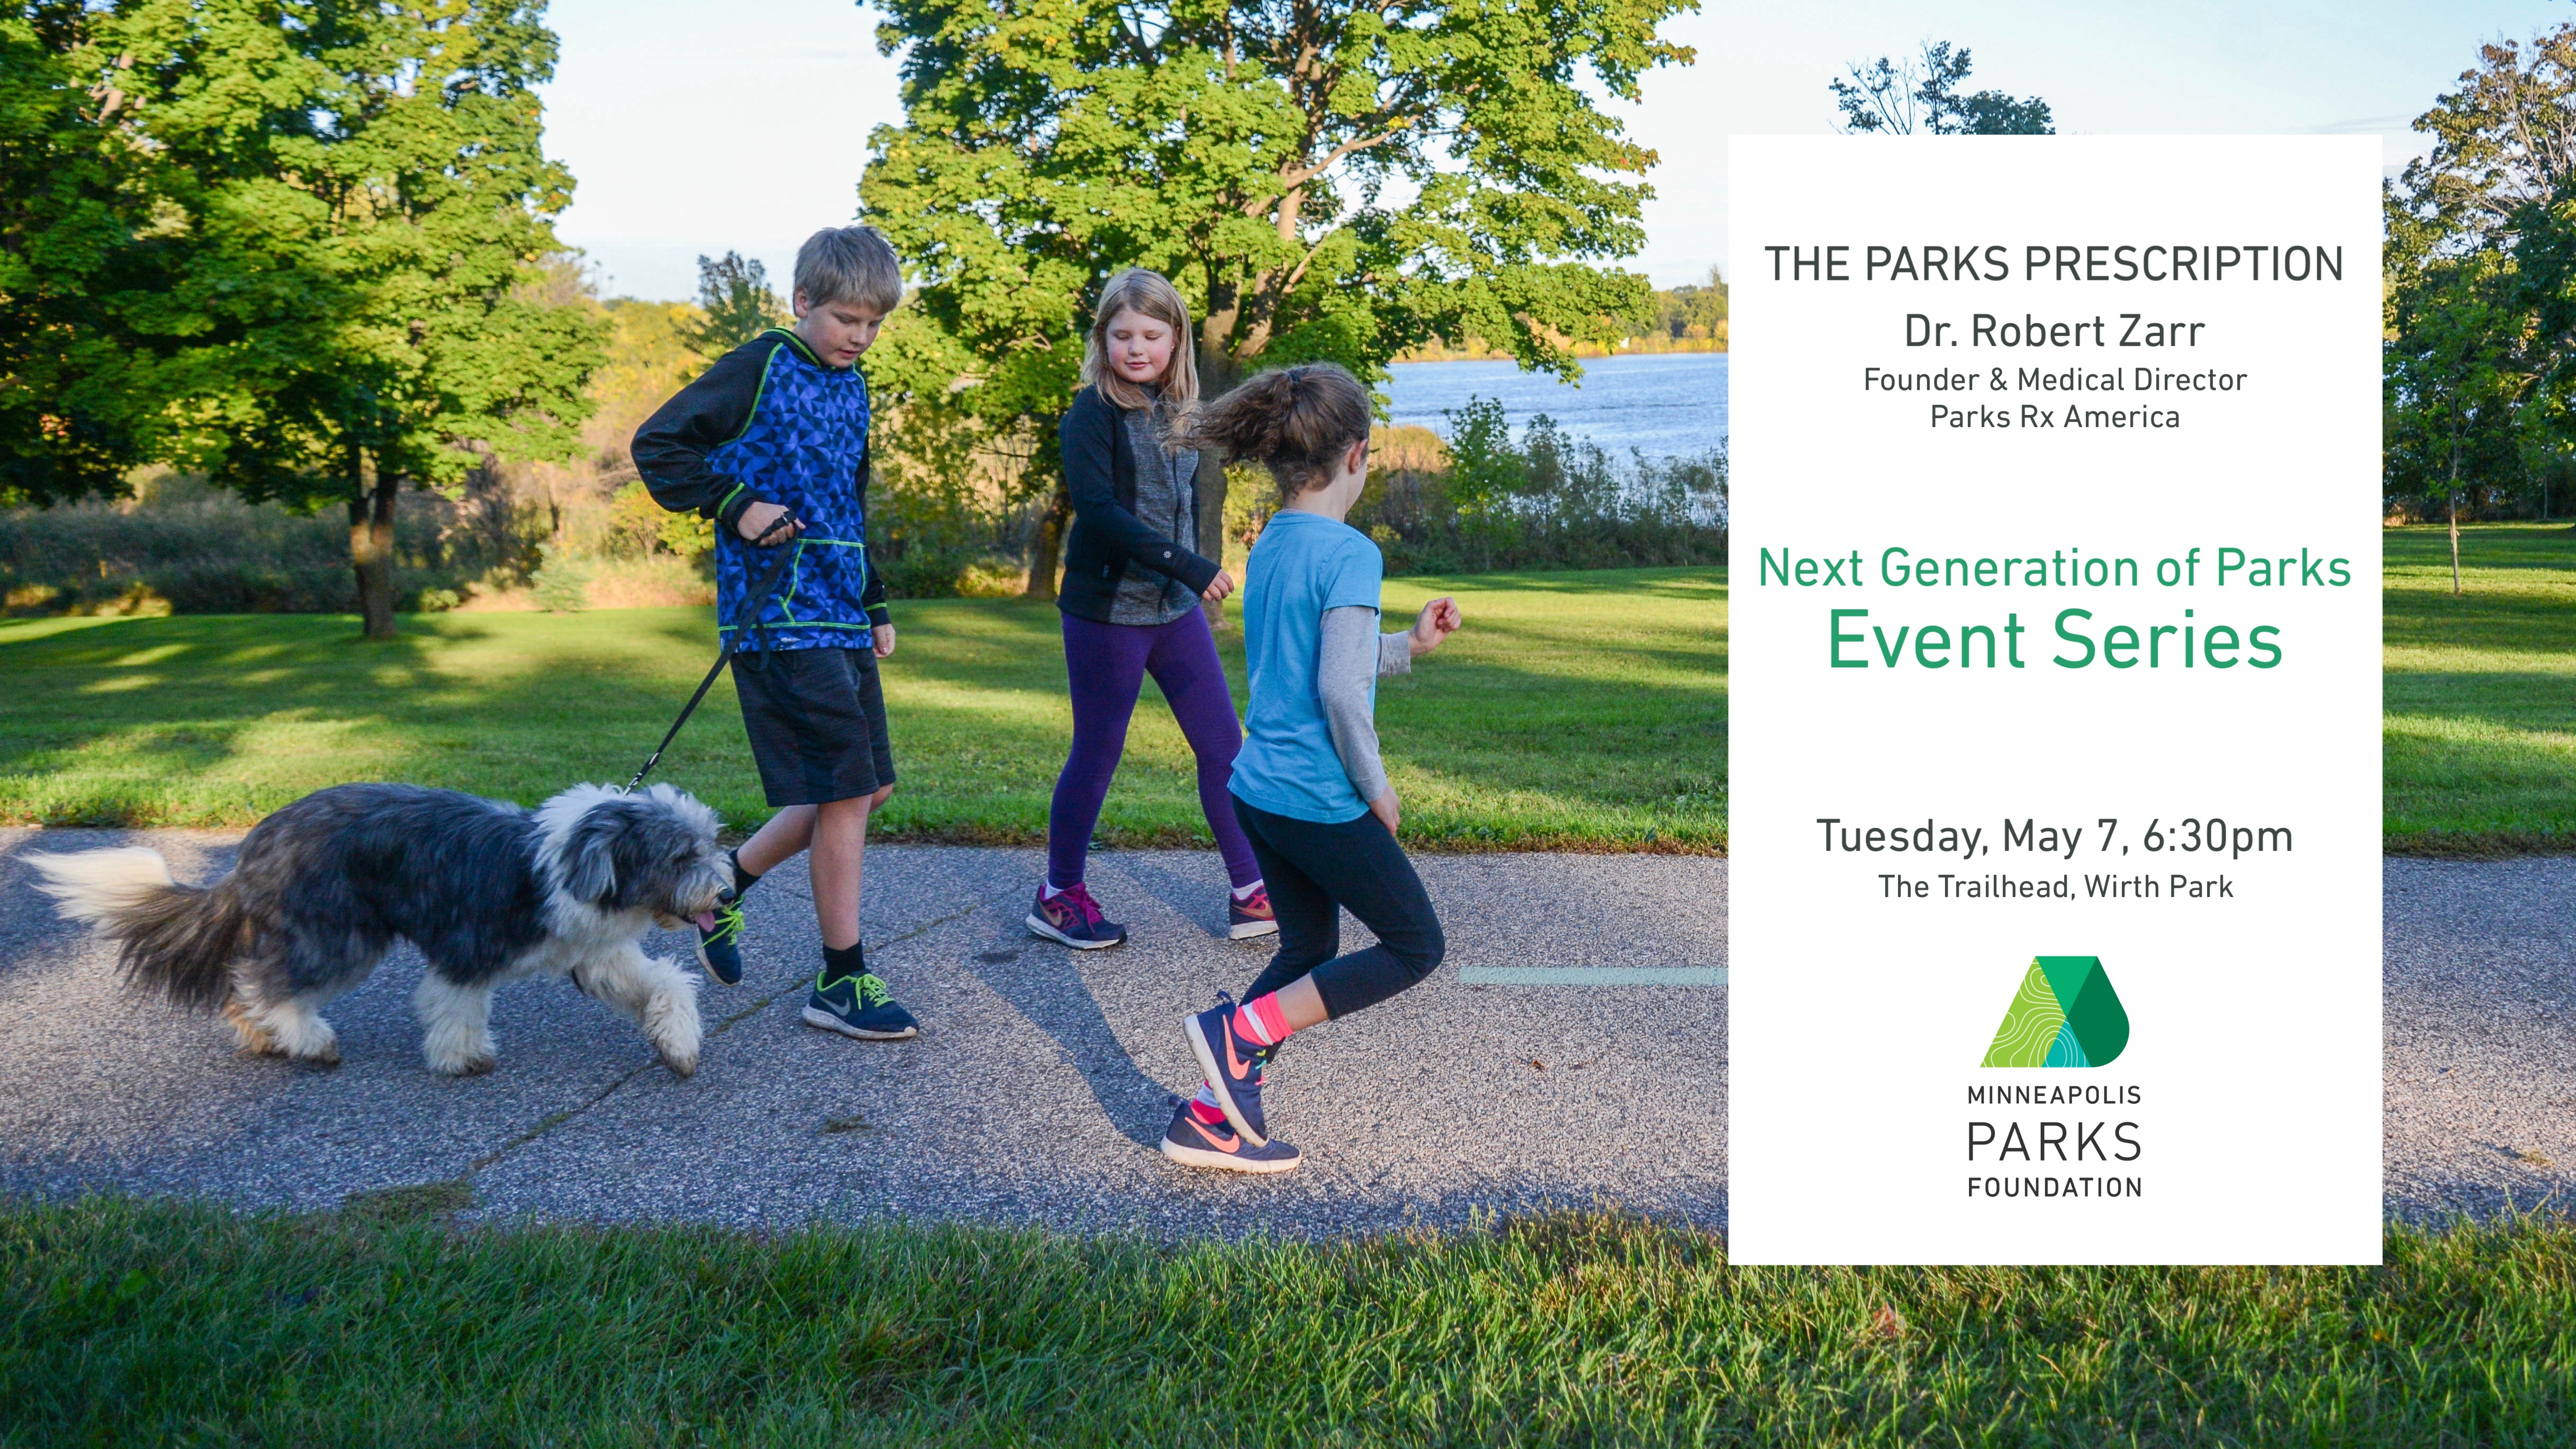 News Release: Join Us for The Parks Prescription Featuring Dr. Robert Zarr – A Next Generation of Parks Event, Tuesday, May 7